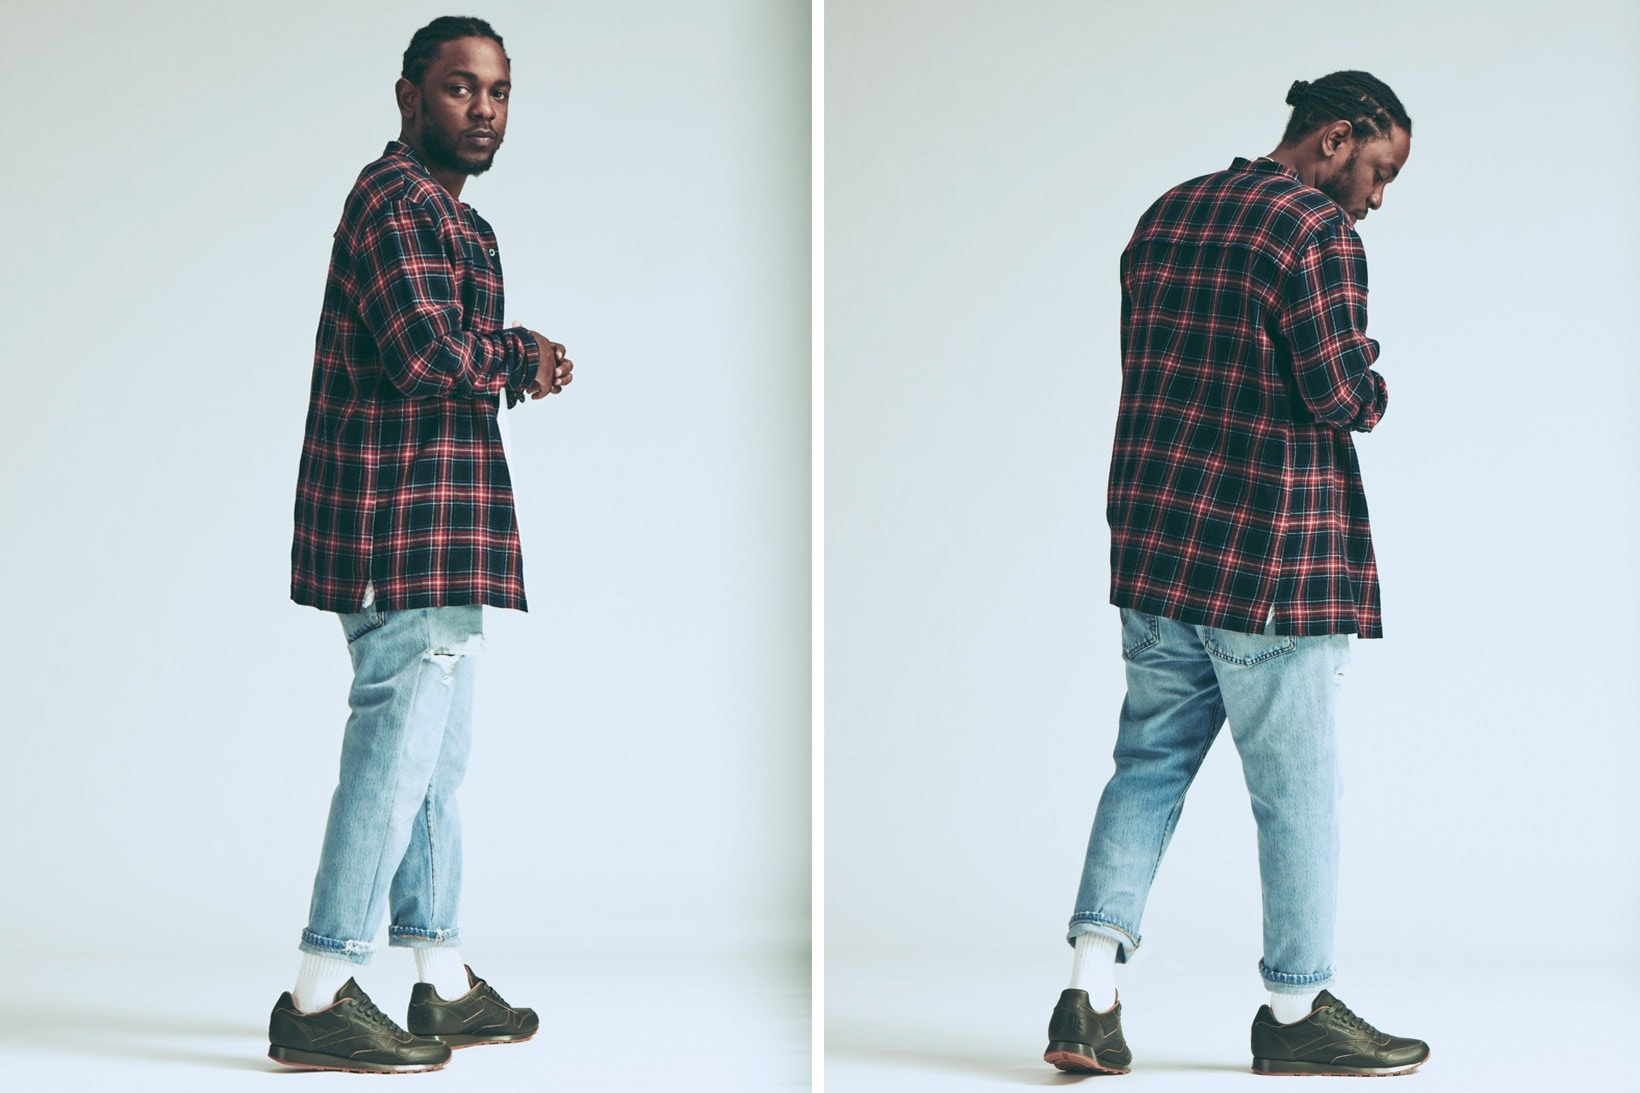 Kendrick Lamar x Reebok Classic "Red and Blue" Collection